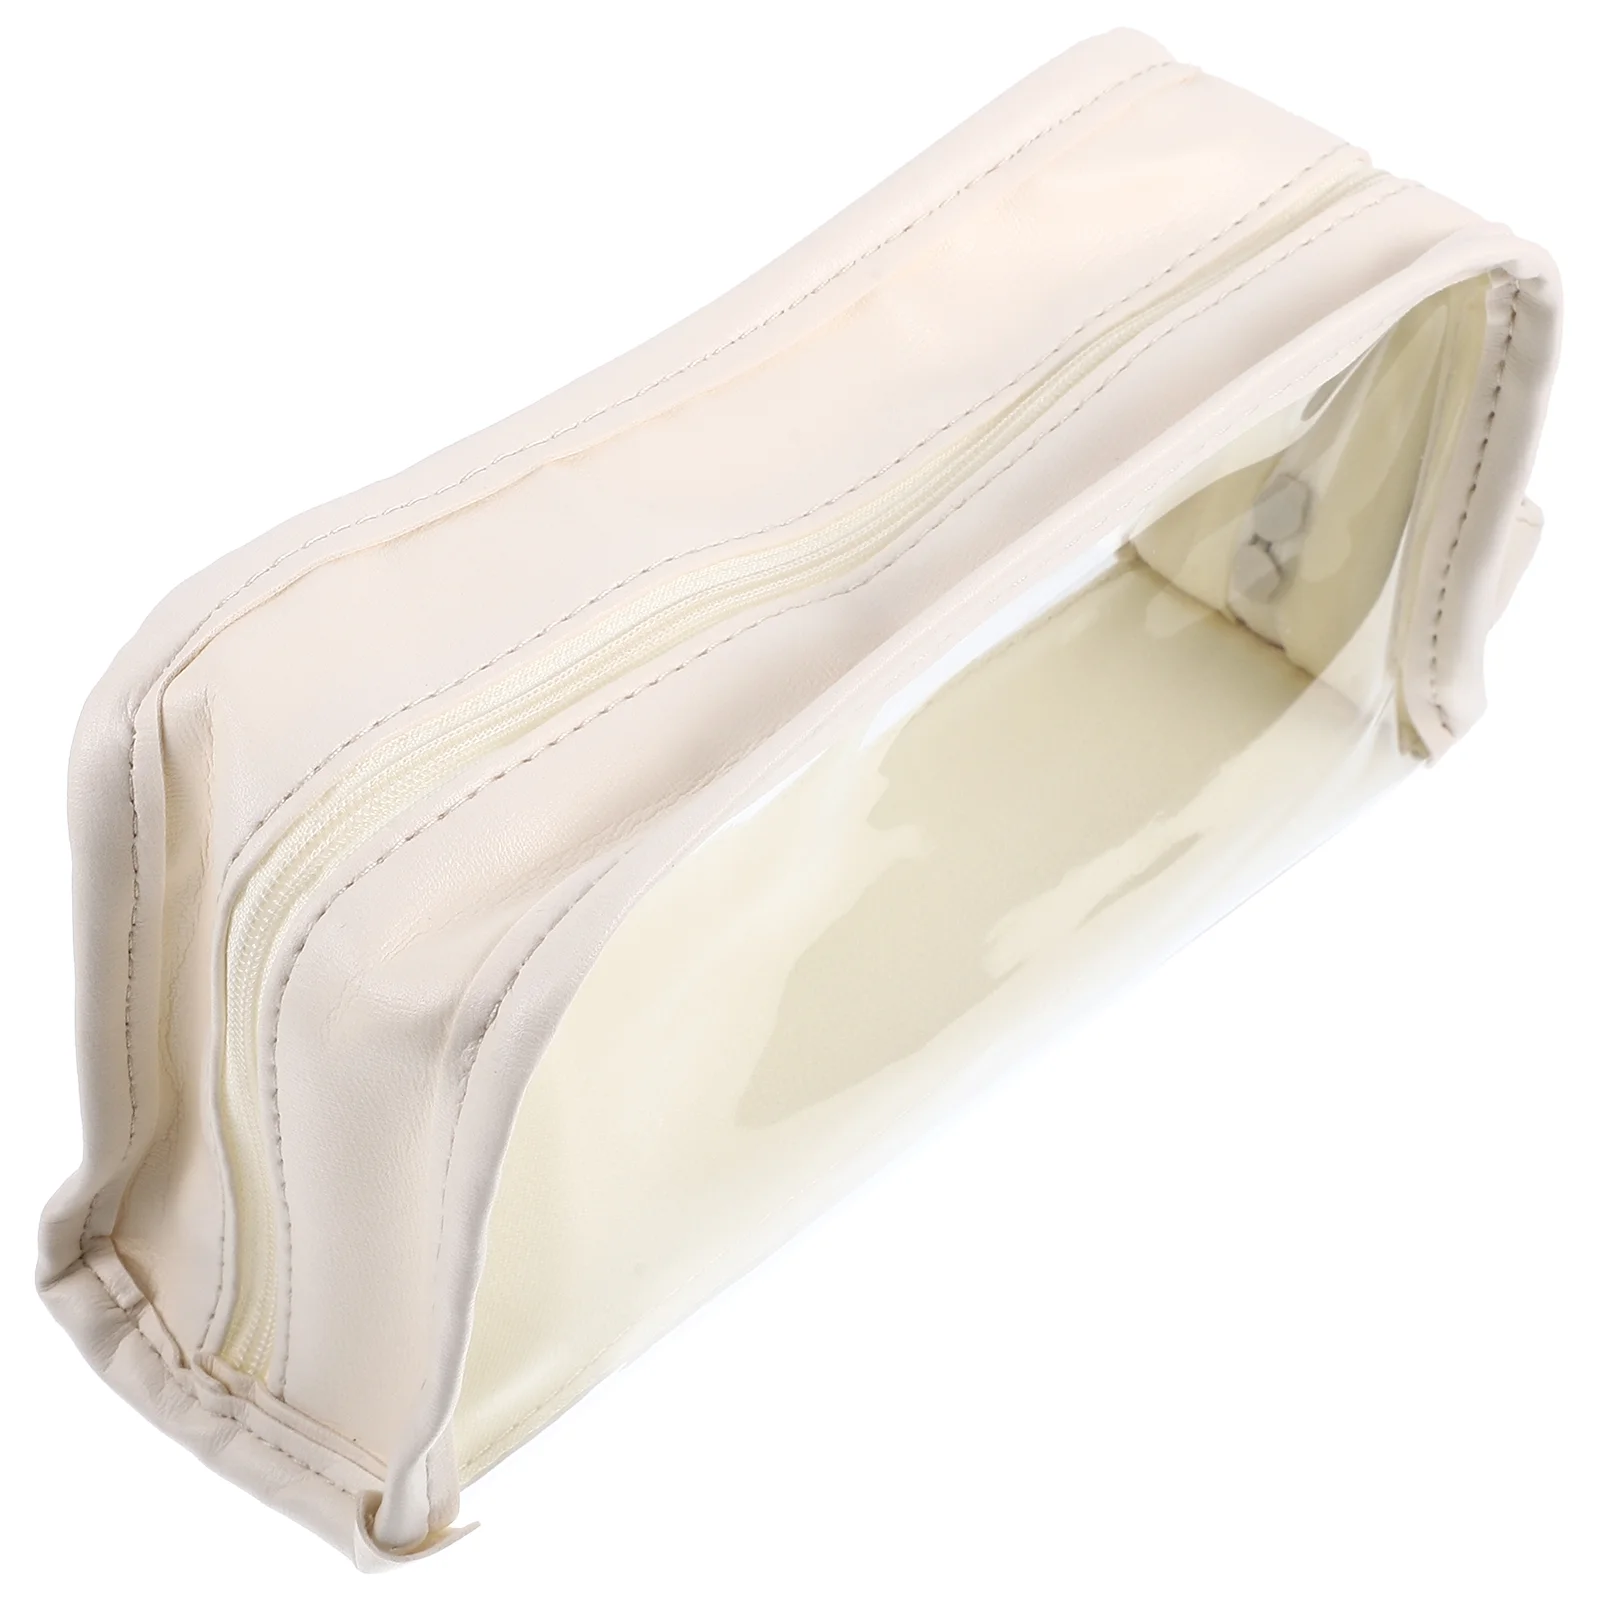 

Makeup Bag Travel Multifunction Airplane Essentials Women Toiletries Pvc Size Student Clear